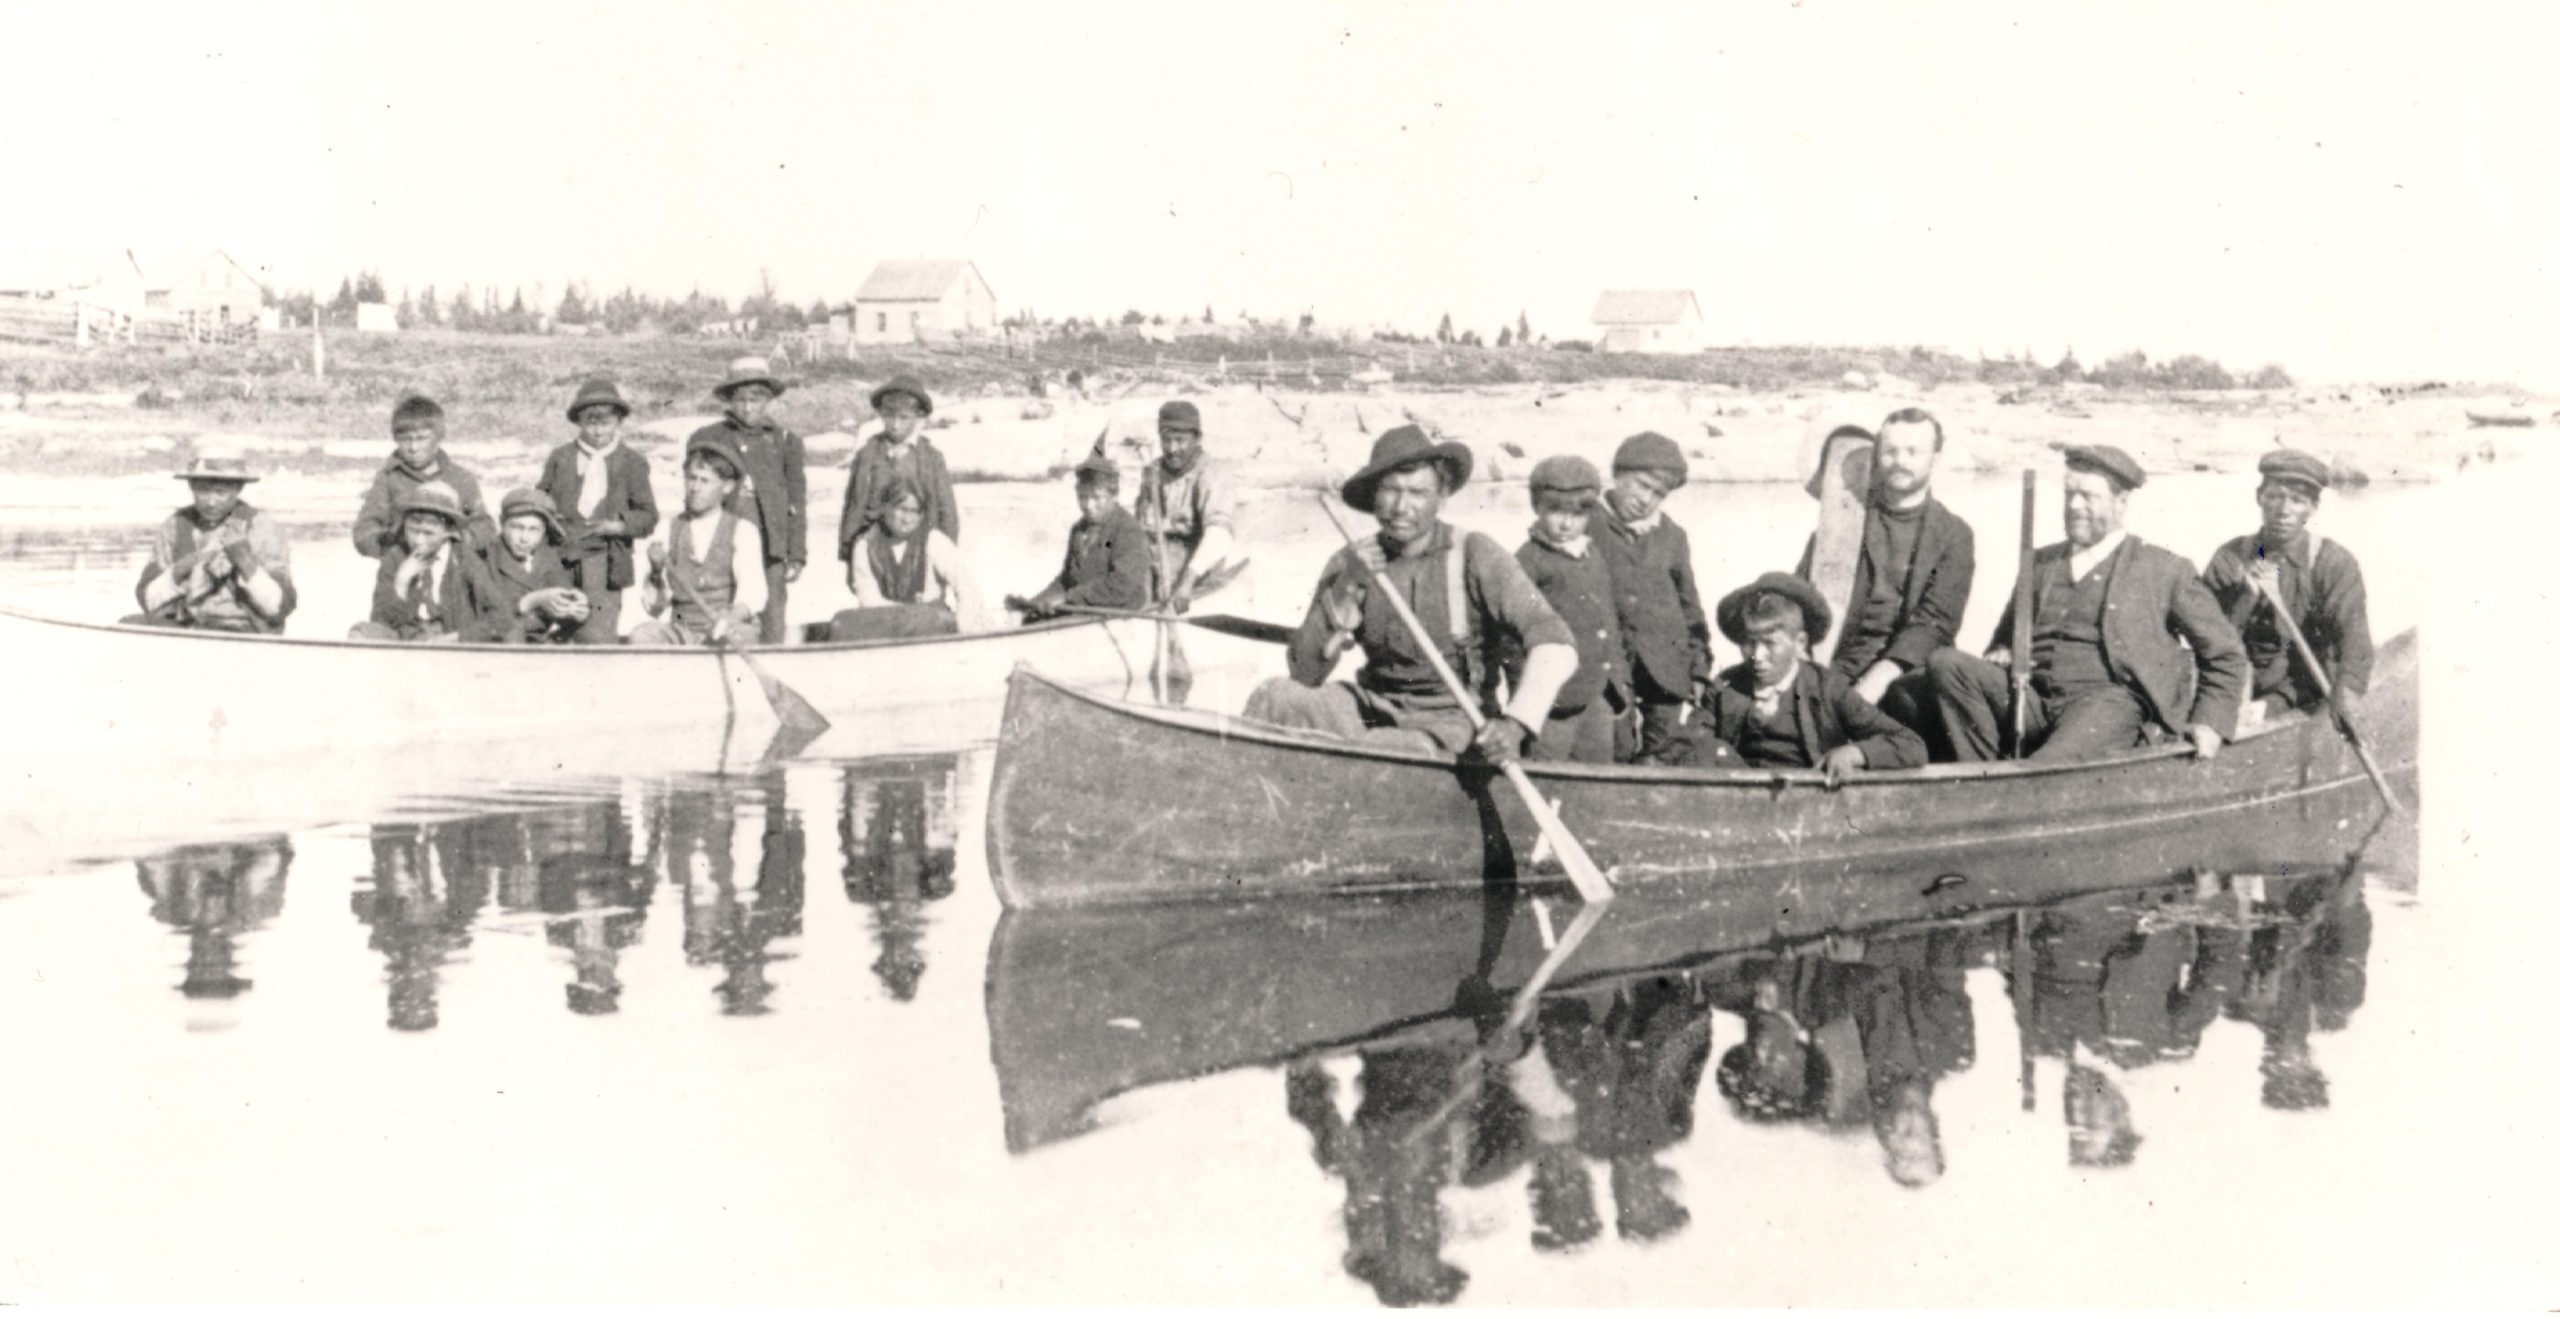 Sepia photograph of two canoes on a body of water, each with several children and adults in it.